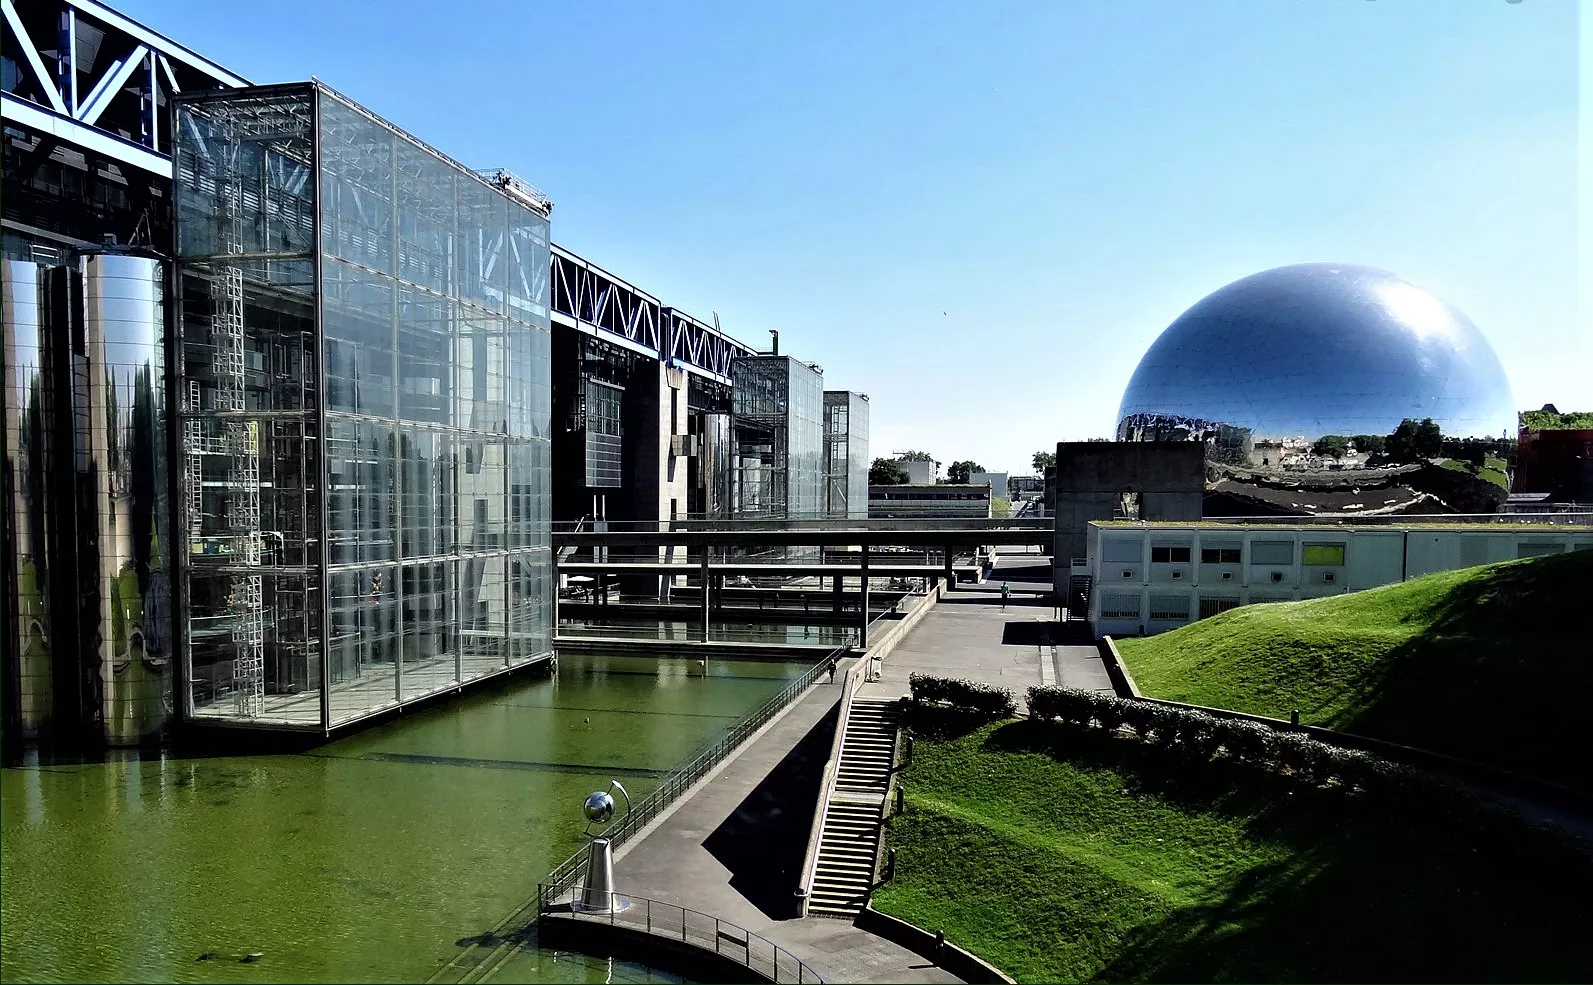 Science and Industry museum in France, Europe | Museums - Rated 3.4